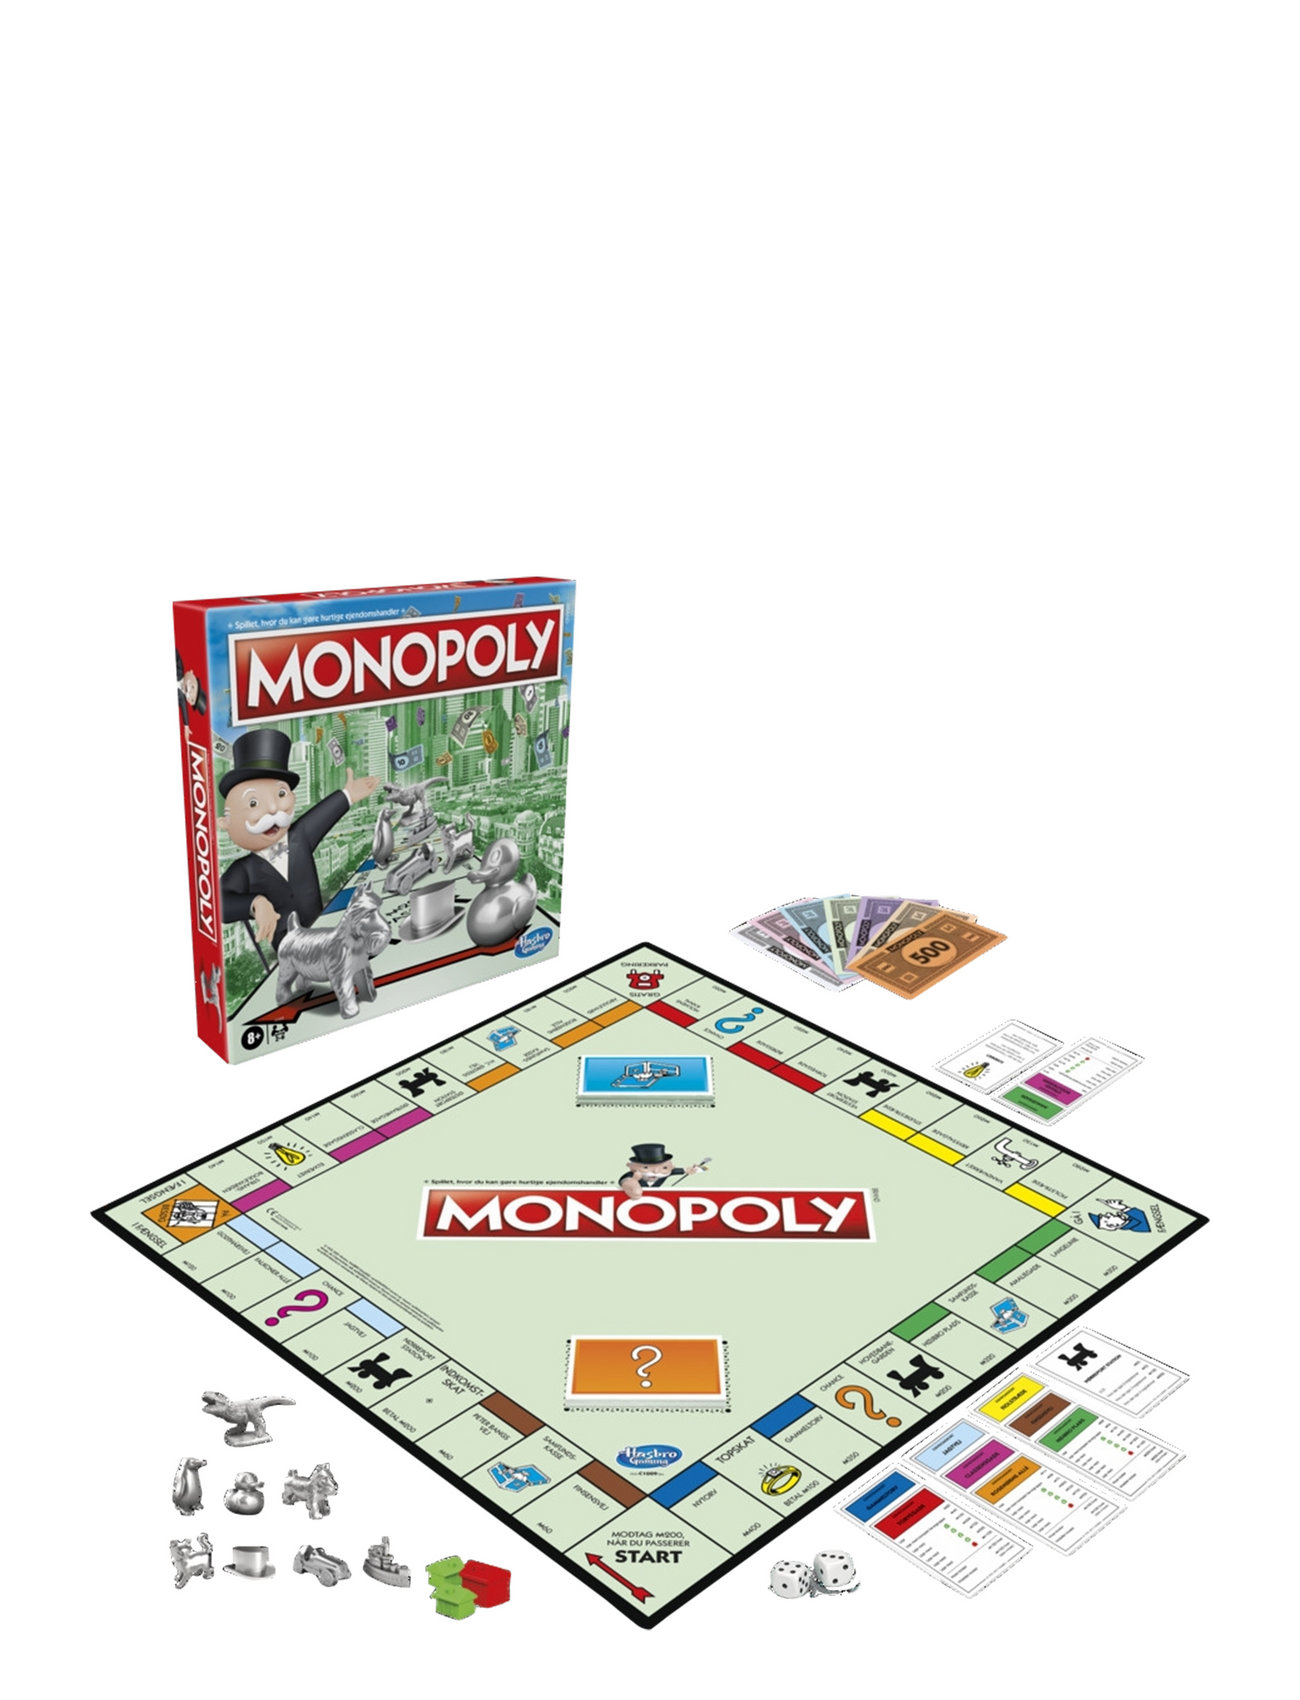 Monopoly Board Game Economic Simulation Toys Puzzles And Games Games Board Games Multi/patterned Monopoly